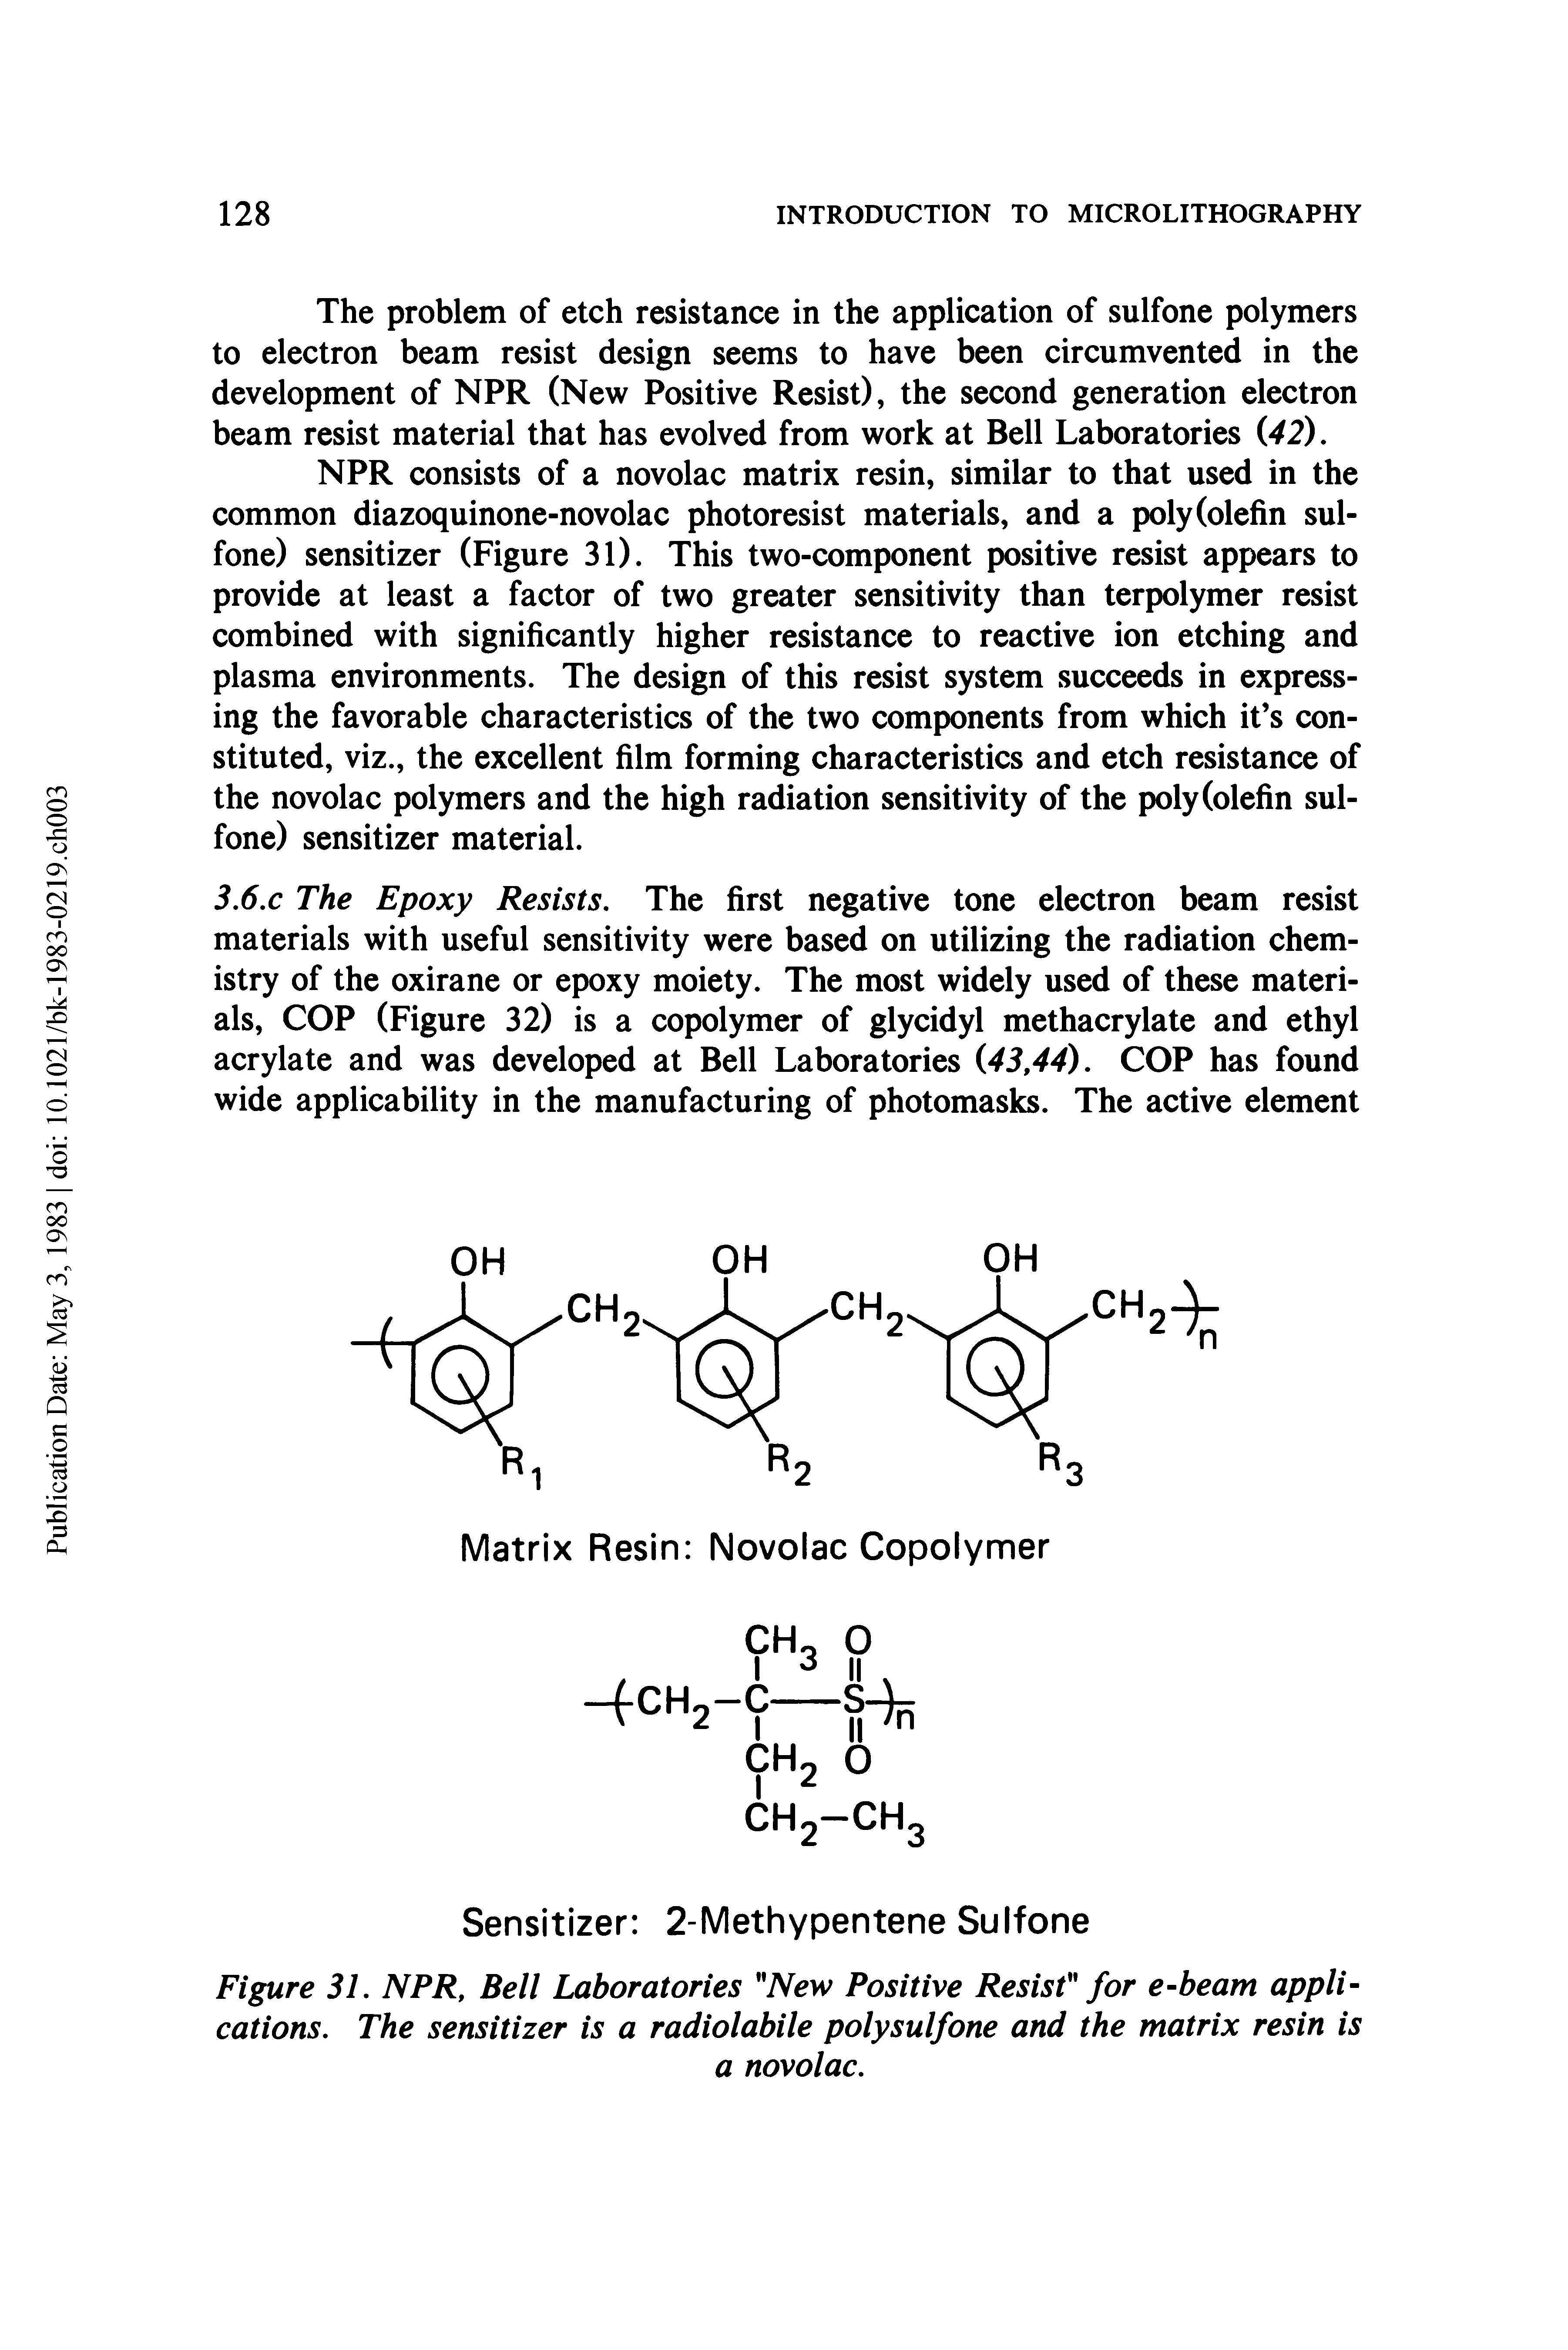 Figure 31. NPR, Bell Laboratories "New Positive Resist for e-beam applications. The sensitizer is a radiolabile polysulfone and the matrix resin is...